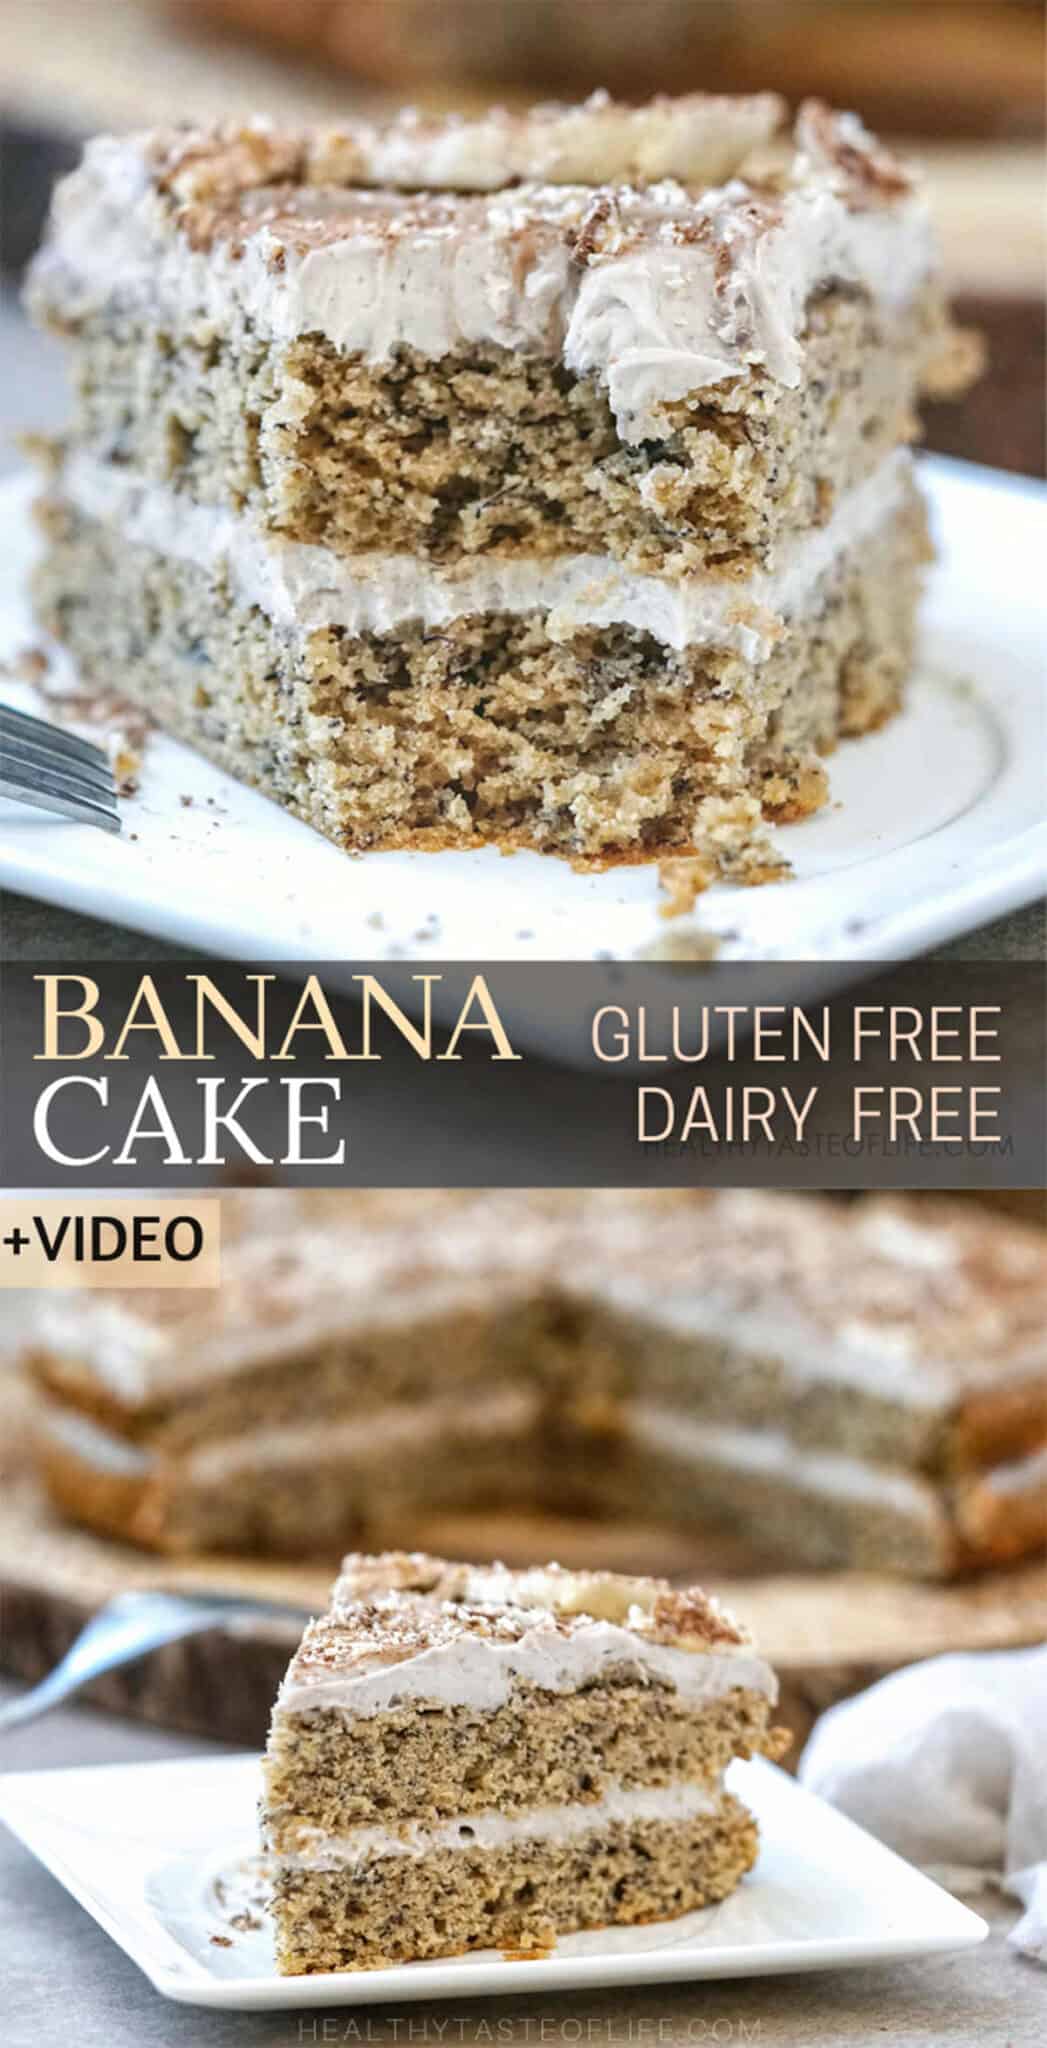 Gluten Free Banana Cake With Dairy Free Frosting | Healthy Taste Of Life